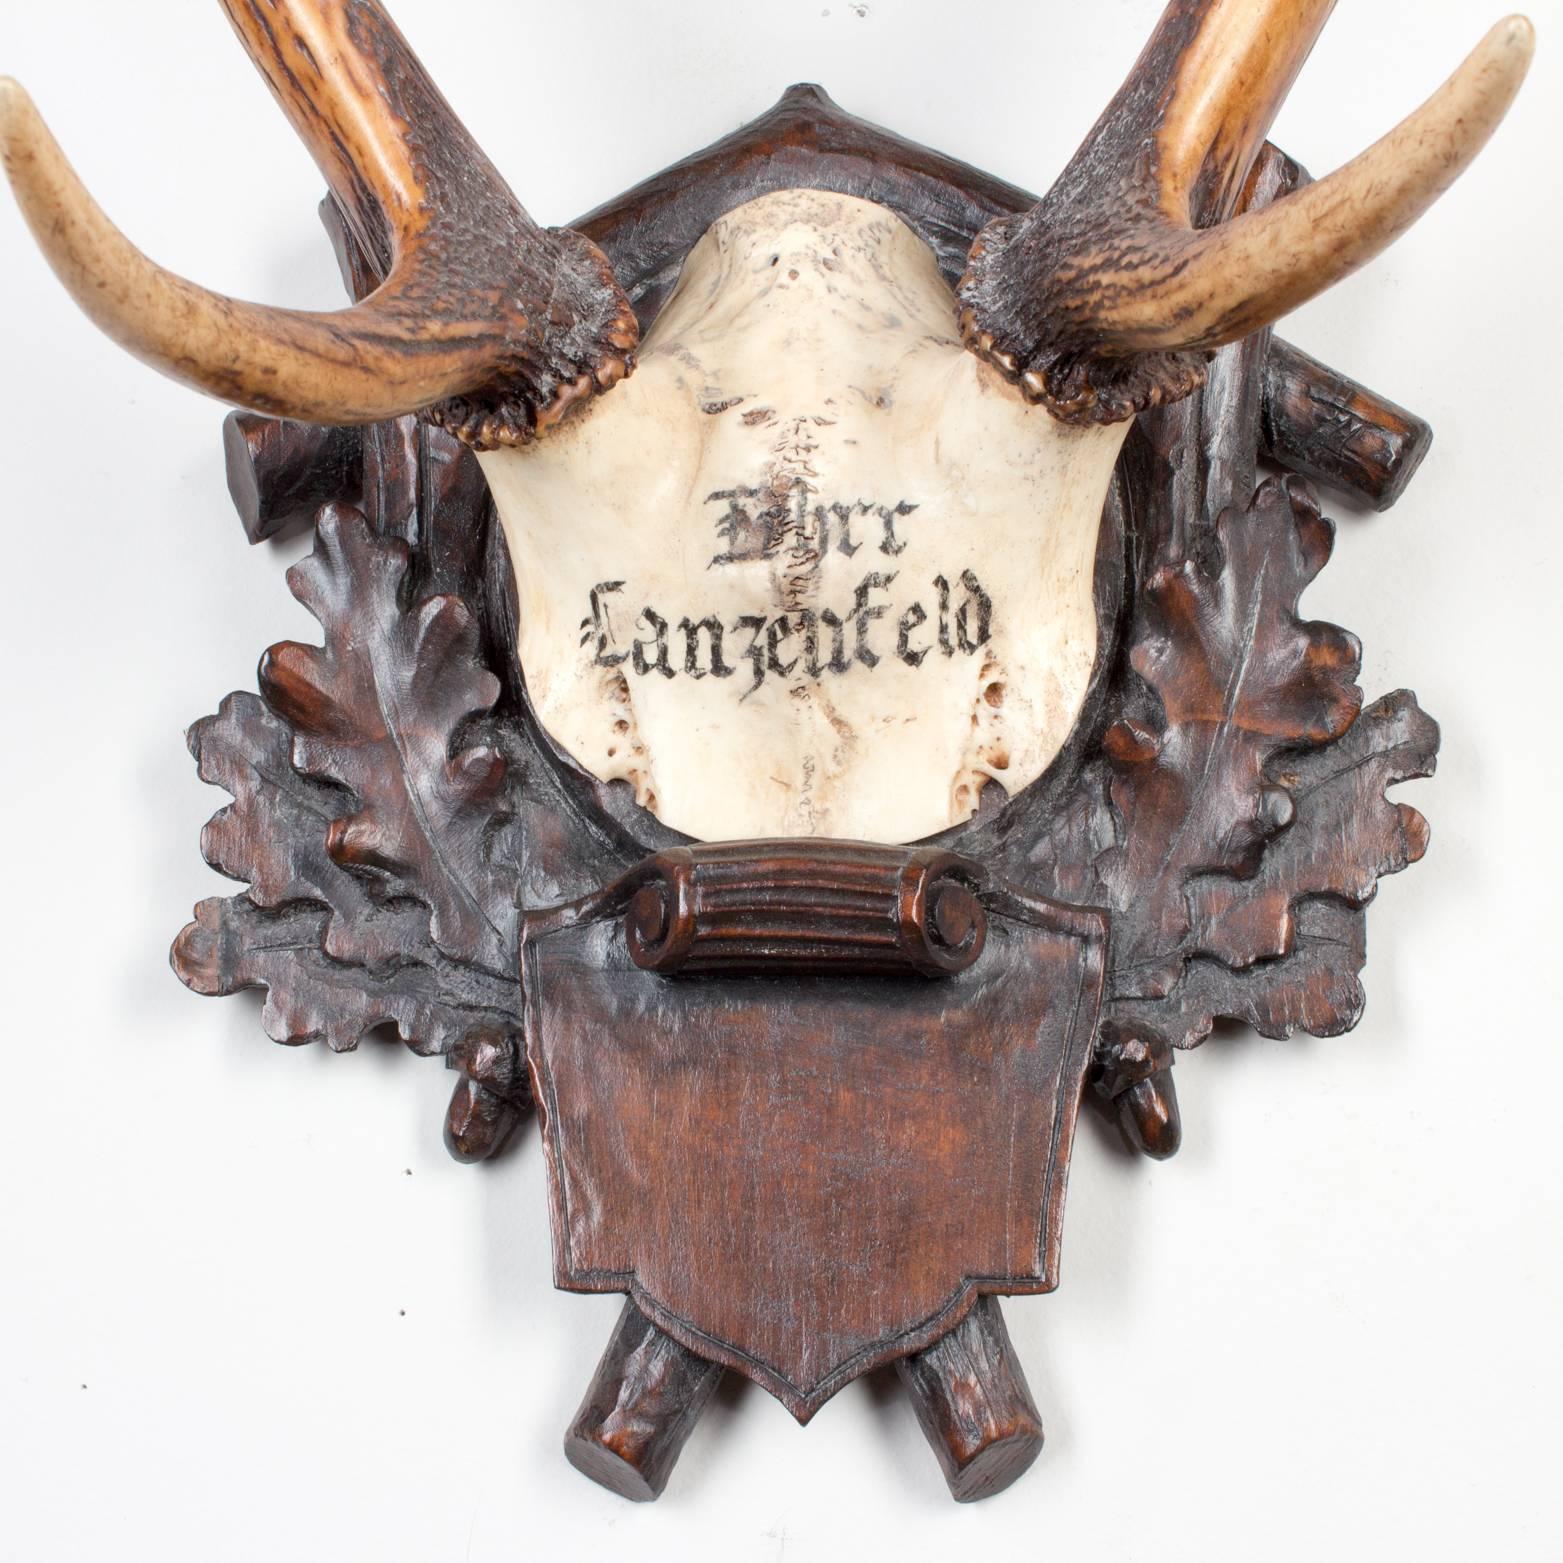 19th century Austrian red stag on original Black Forest carved plaque that hung in Emperor Franz Josef's castle at Eckartsau in the Southern Austrian Alps. Eckartsau was a favorite hunting schloss of the Habsburg family. The plaque itself is an